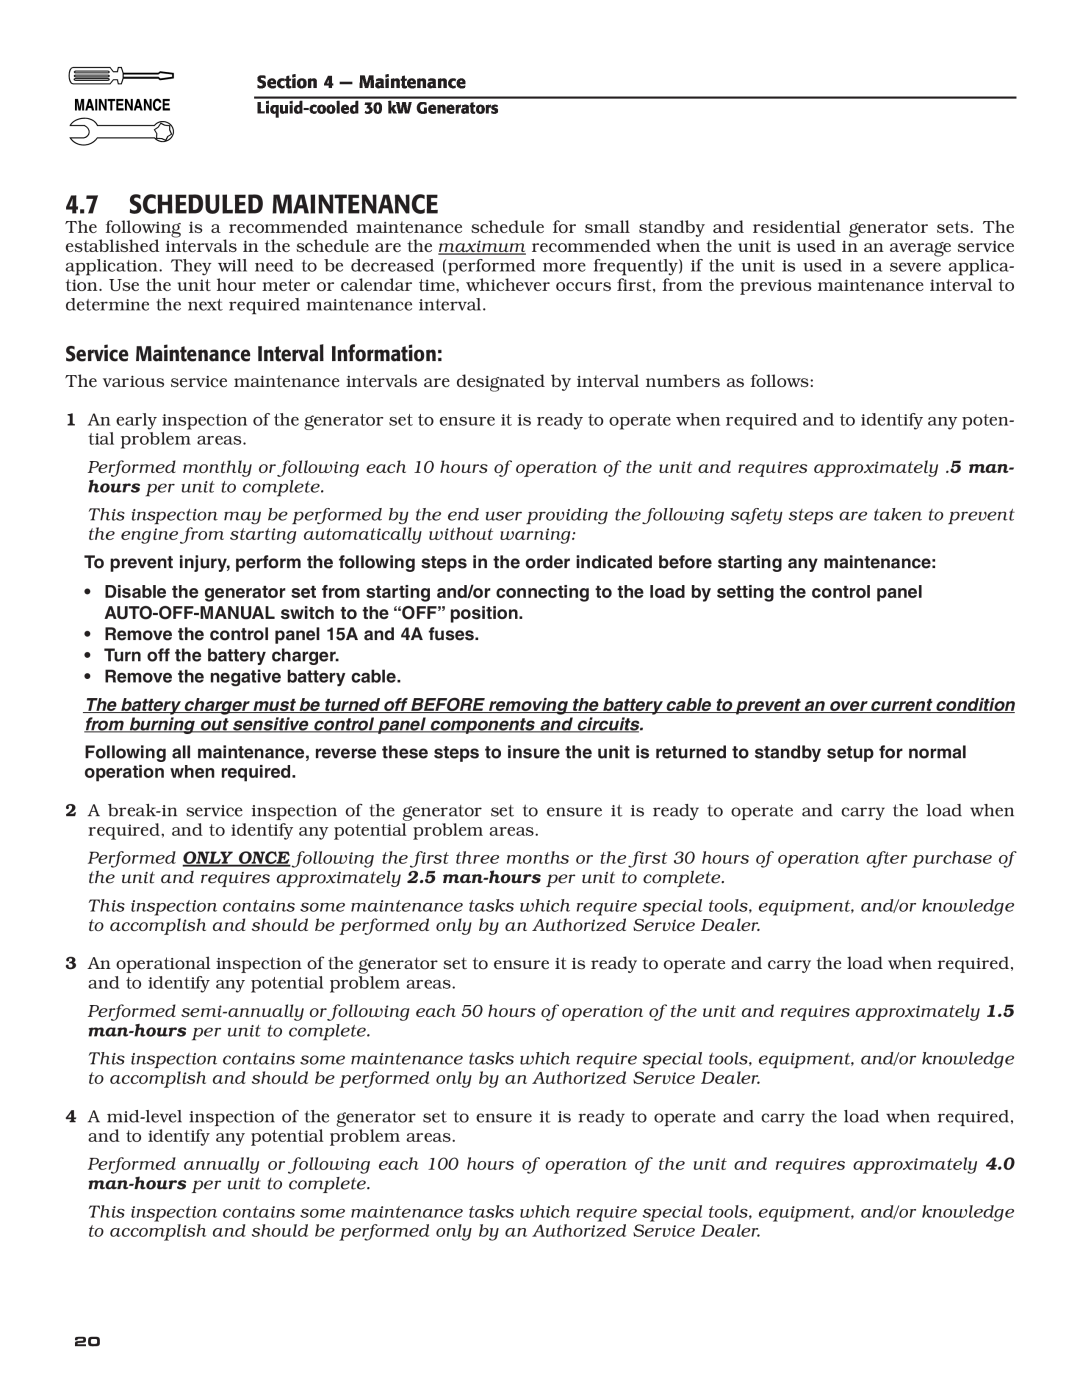 Generac Power Systems 004988-4 owner manual Scheduled Maintenance, Service Maintenance Interval Information 